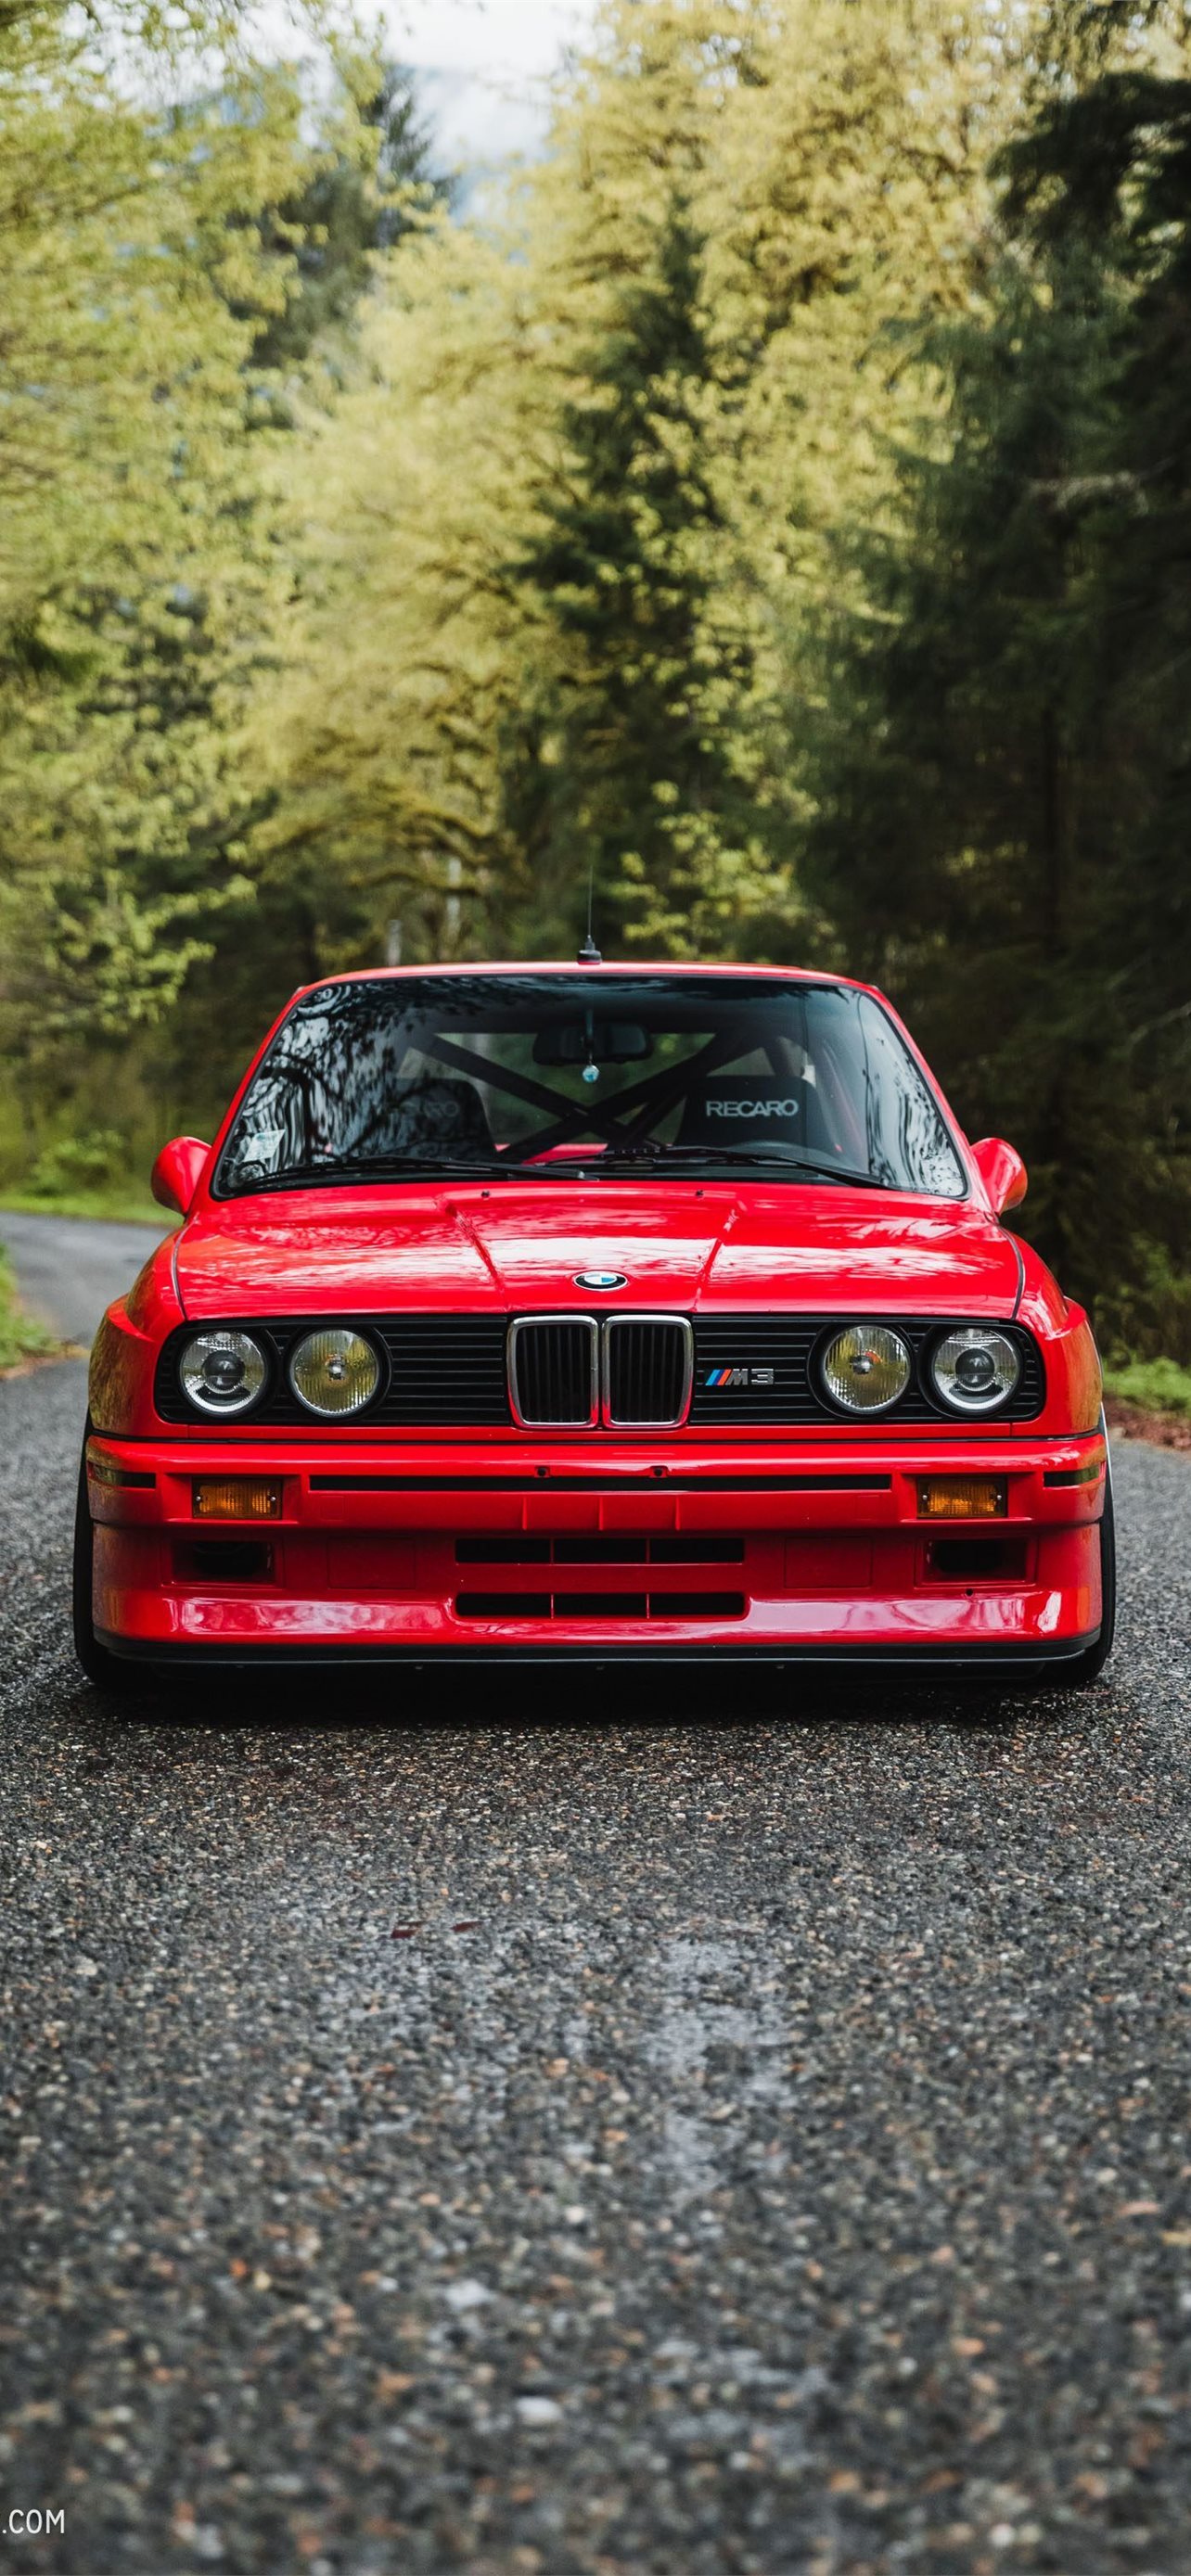 Bmw E30 M3 Phone Wallpapers Wallpaper Cave